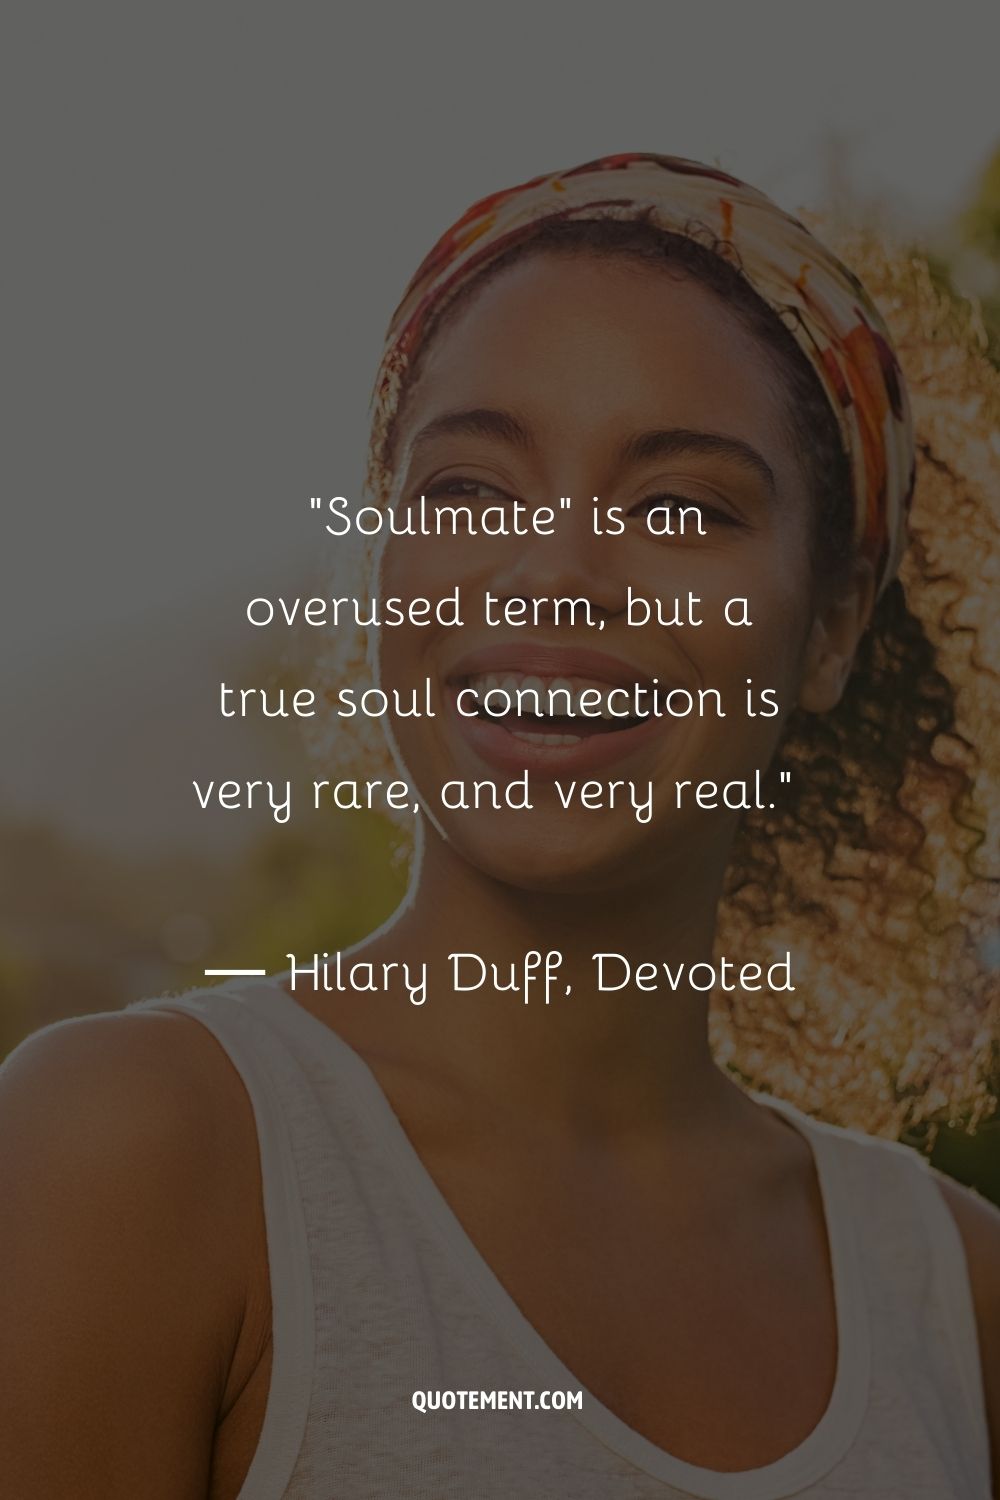 Soulmate is an overused term, but a true soul connection is very rare, and very real.